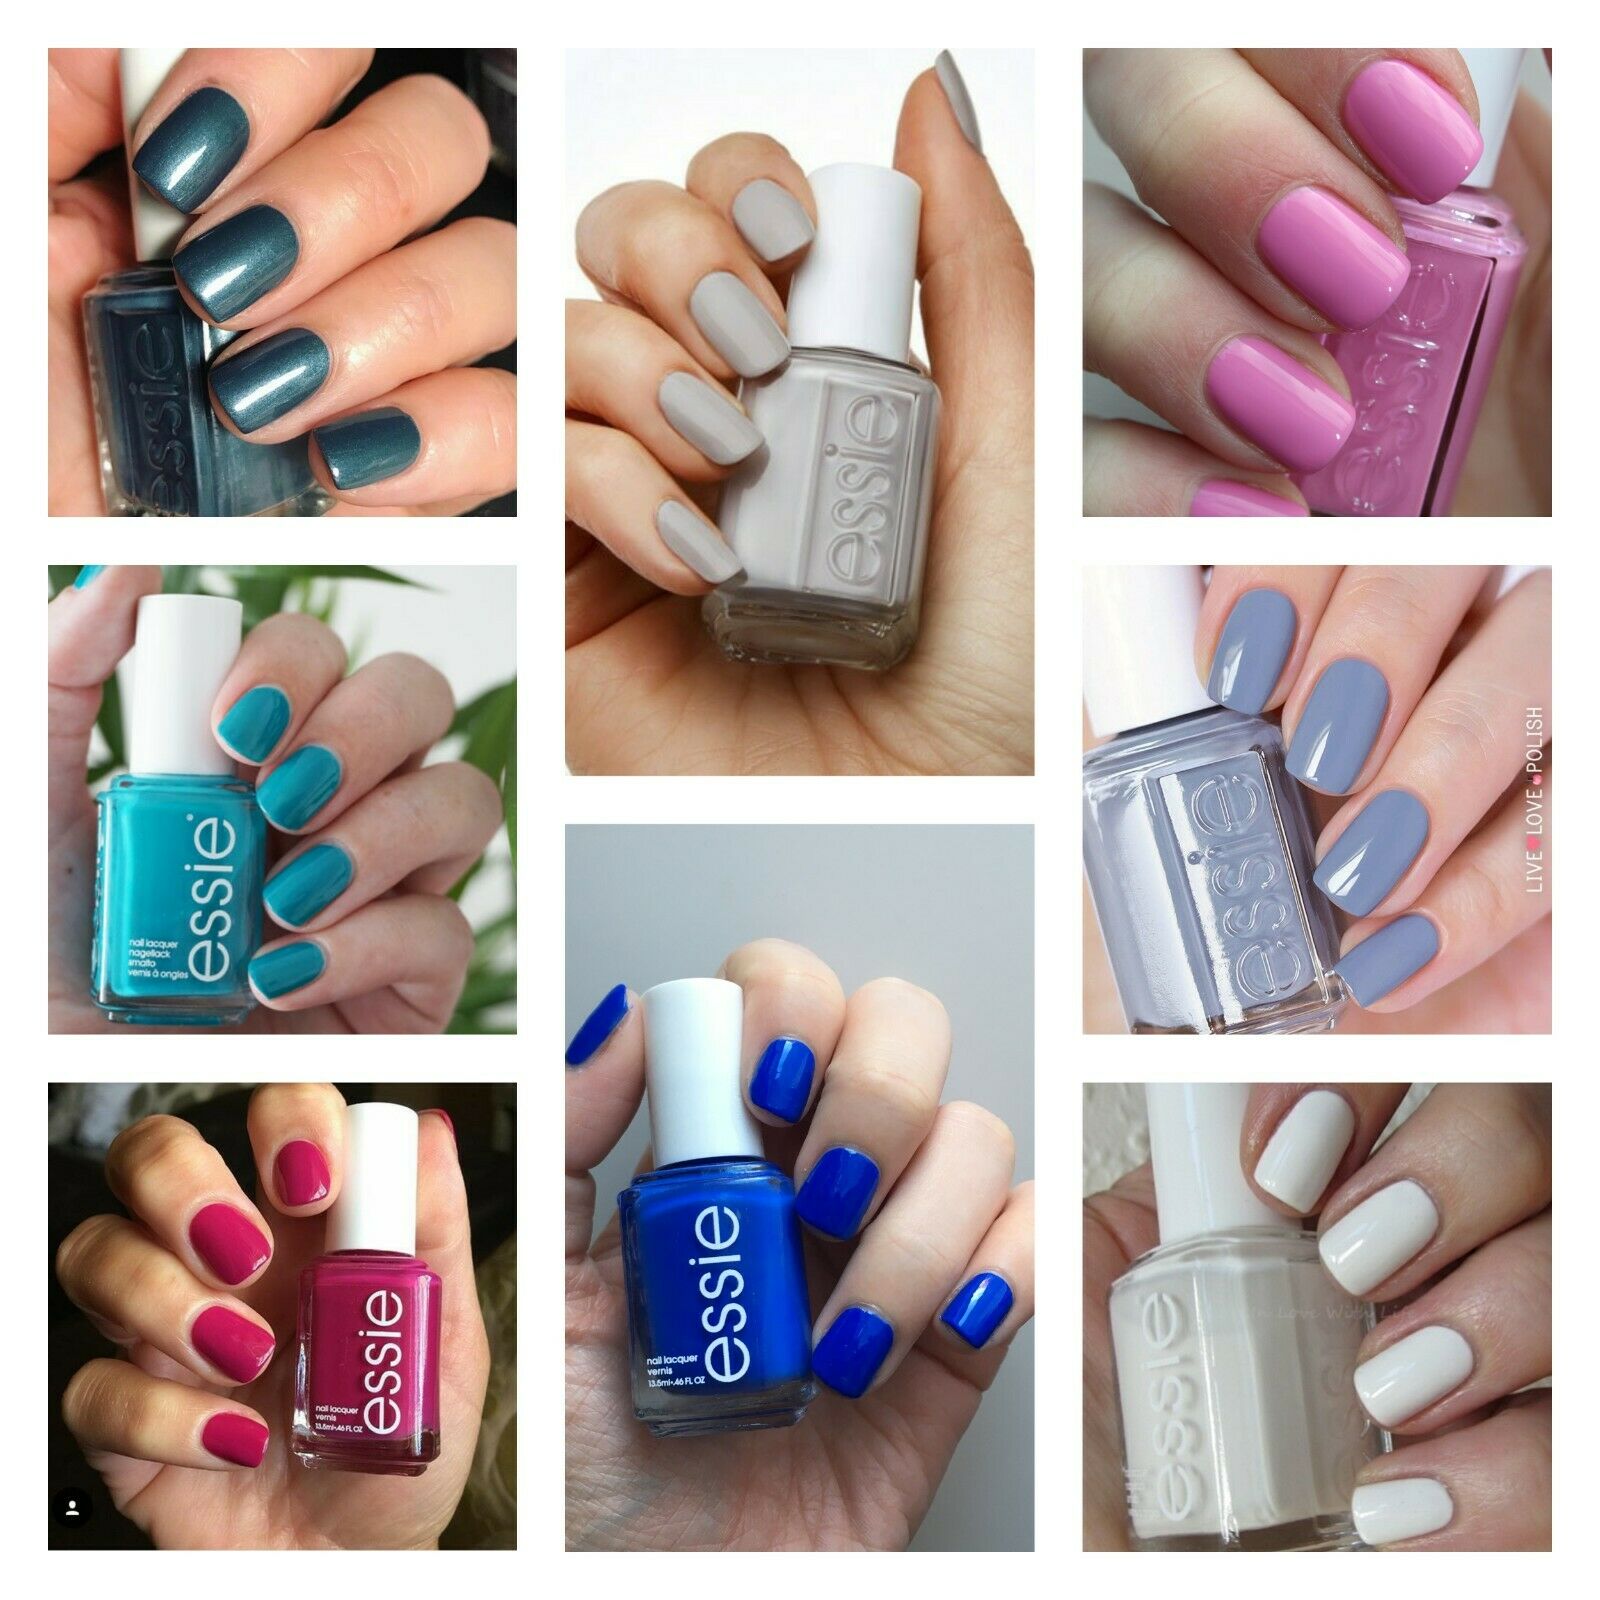 Essie Nail Polish Lacquer, Choose Your Color, B2,g1 Must Add All 3 To Cart!